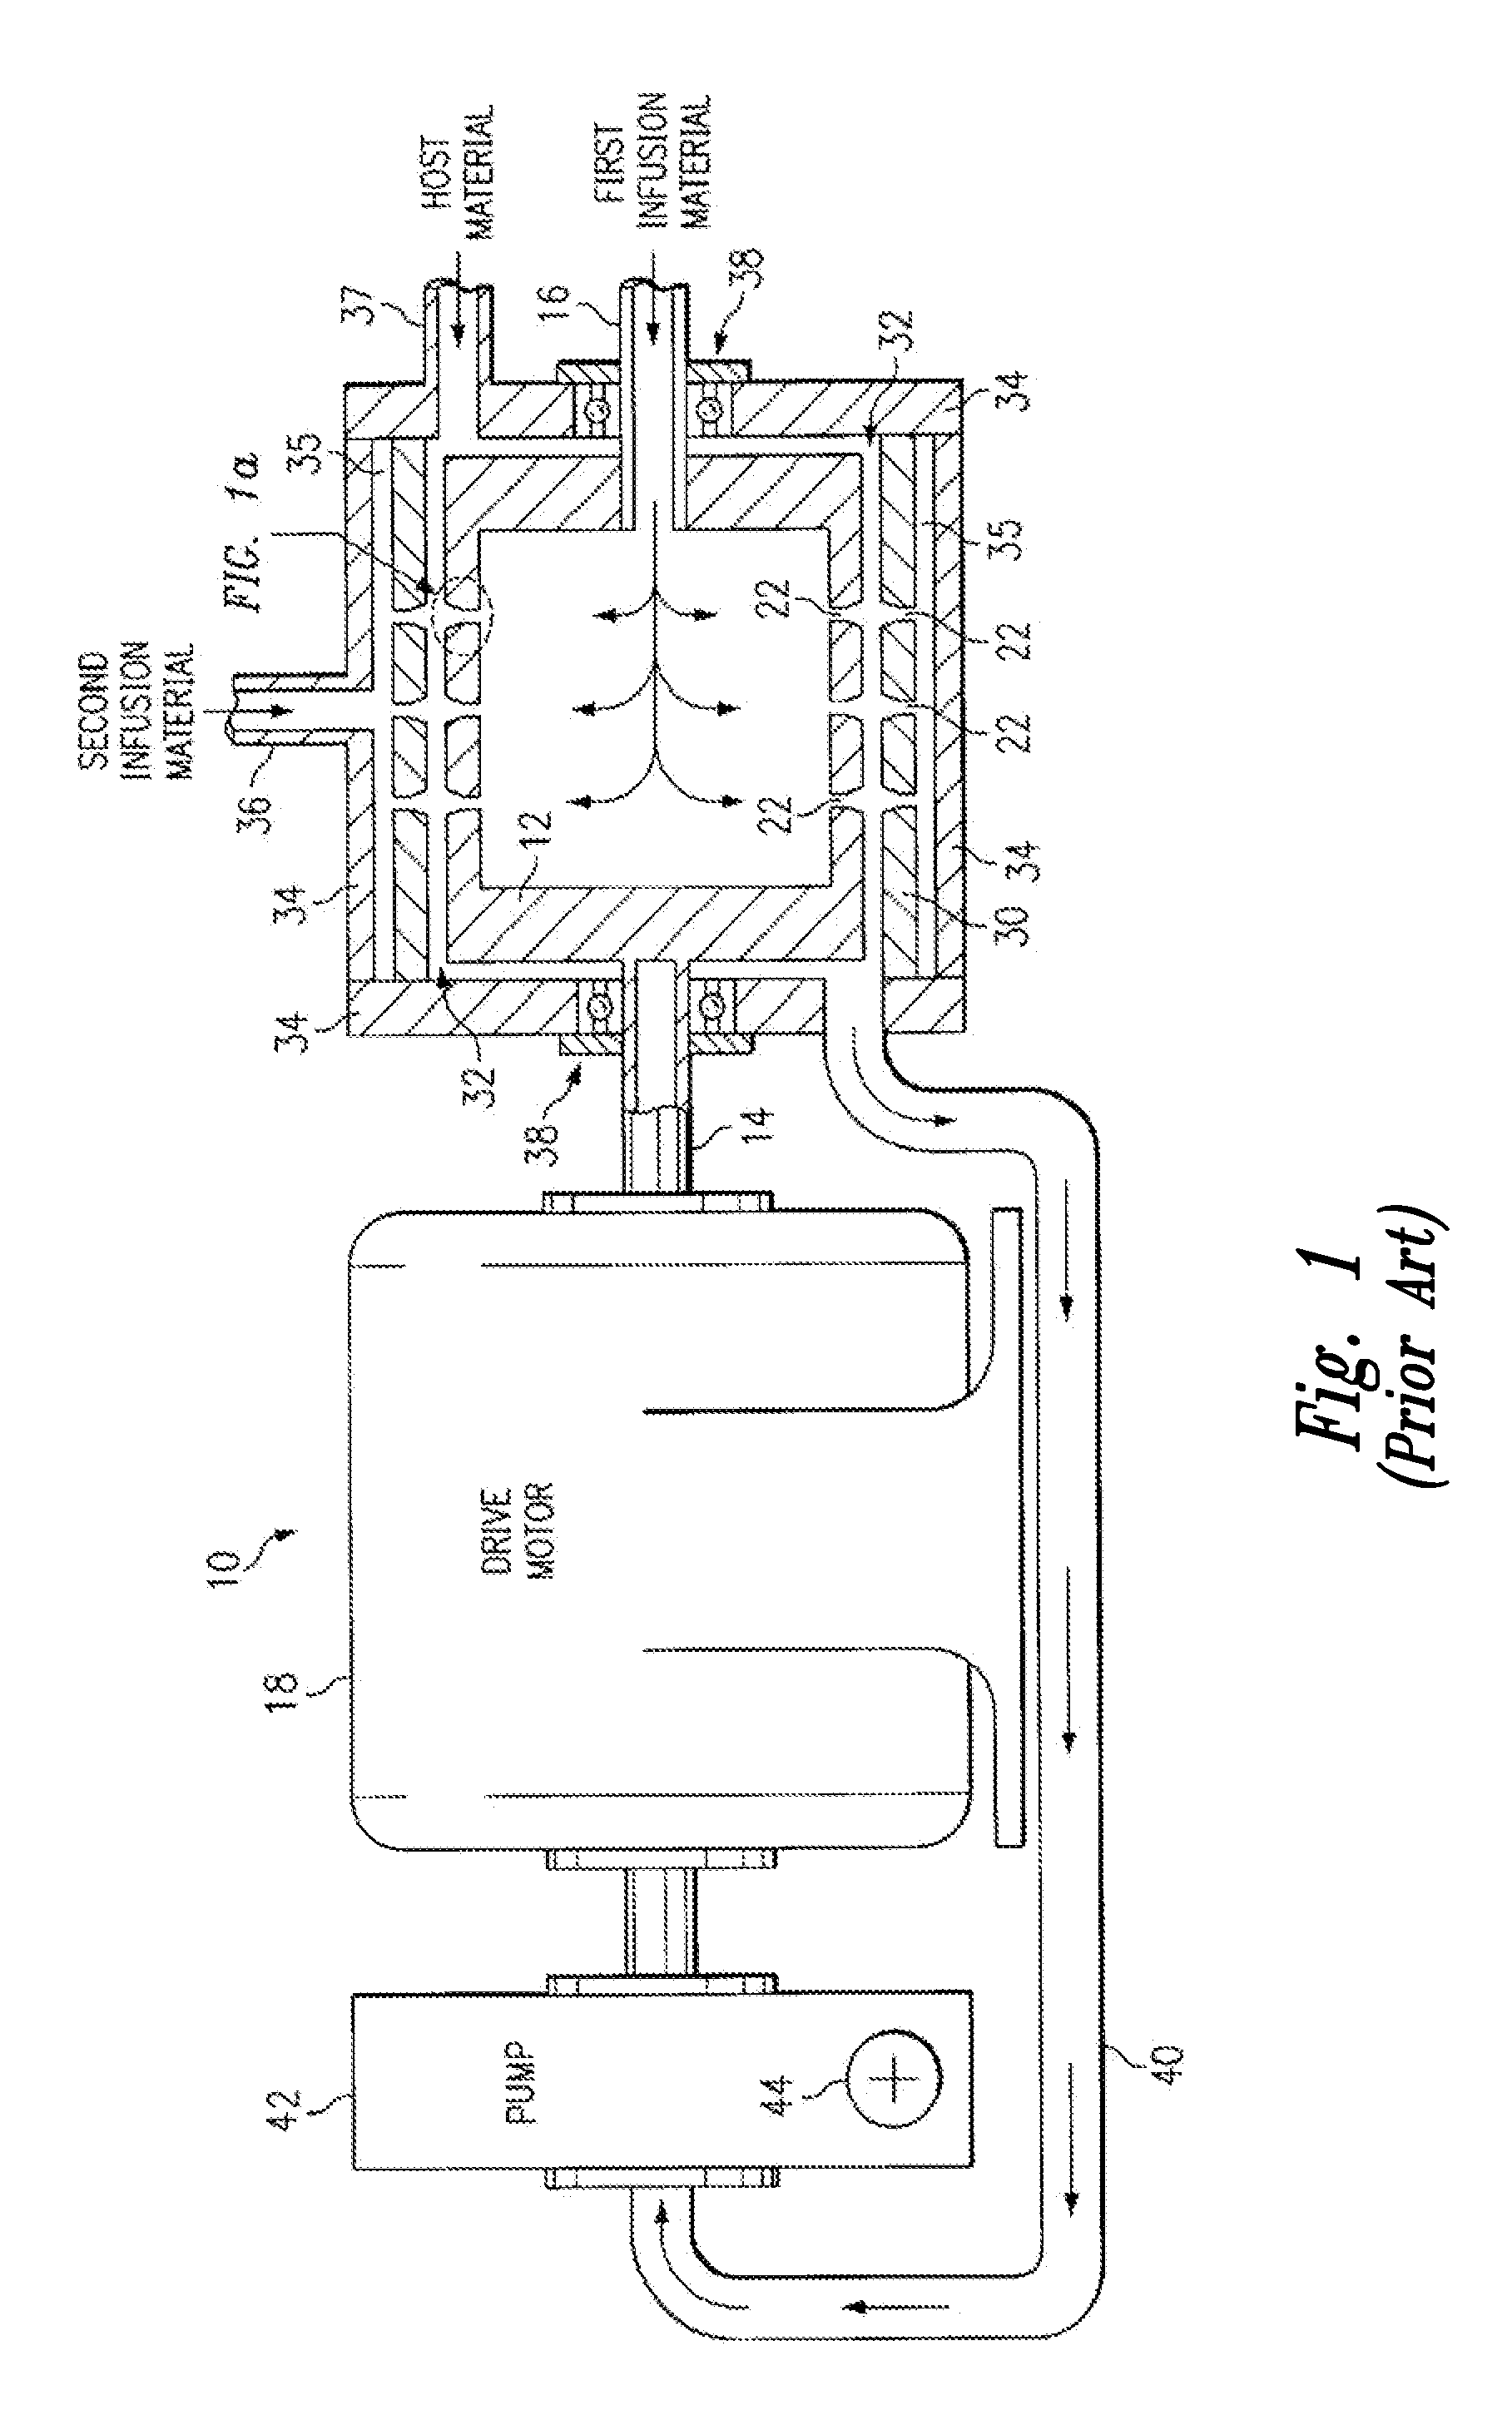 Compositions and methods for treating cystic fibrosis